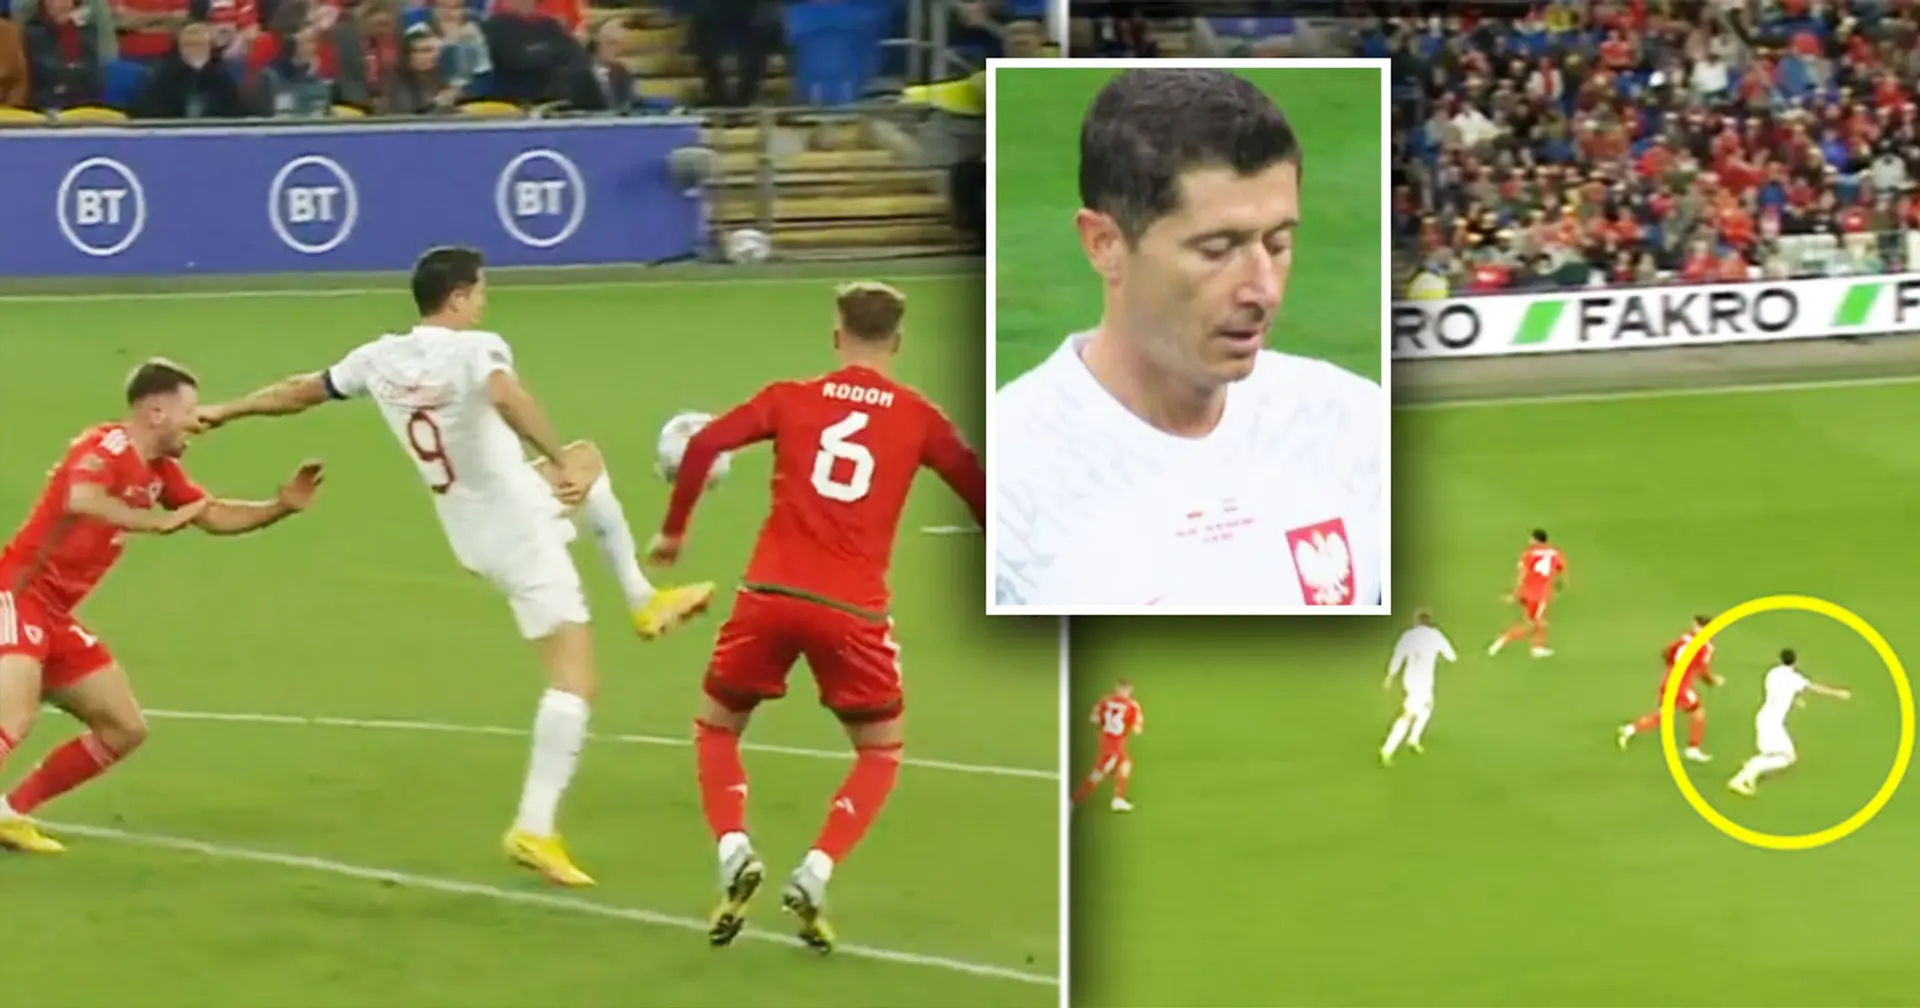 'He can do it all': Lewandowski defies laws of physics with no-look Poland assist